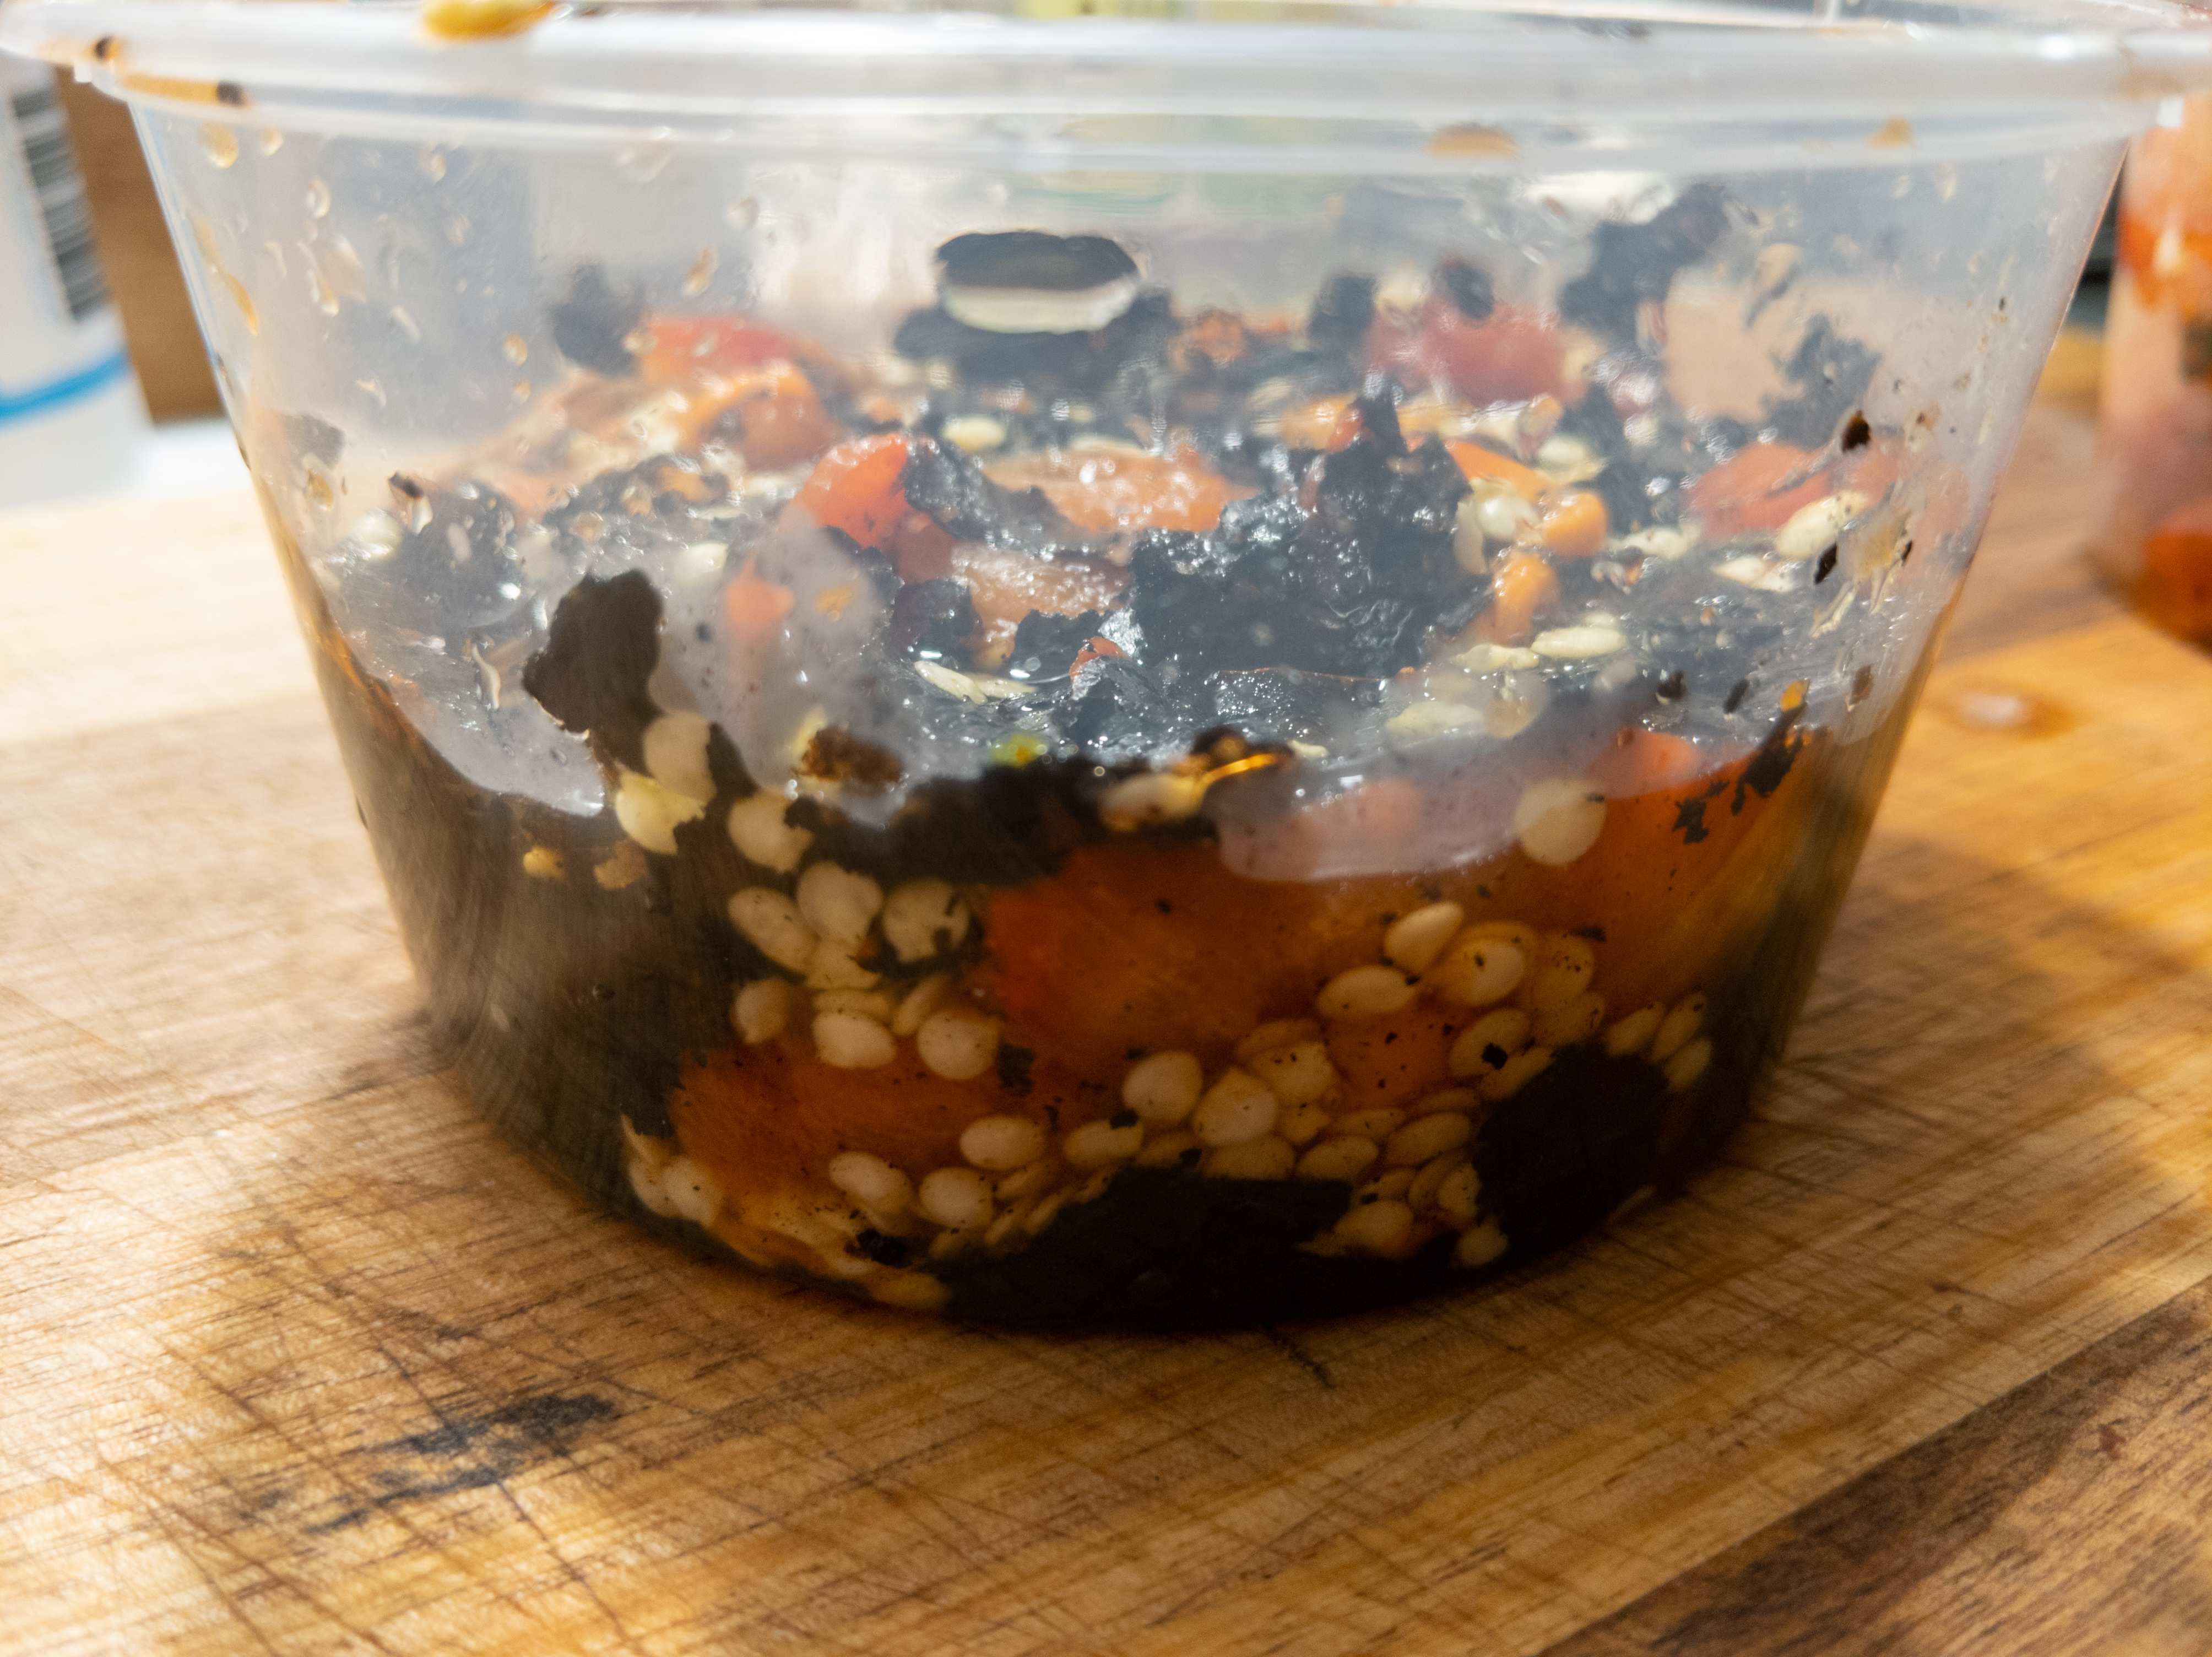 A plastic container filled with the pepper discard, with some liquid surrounding it